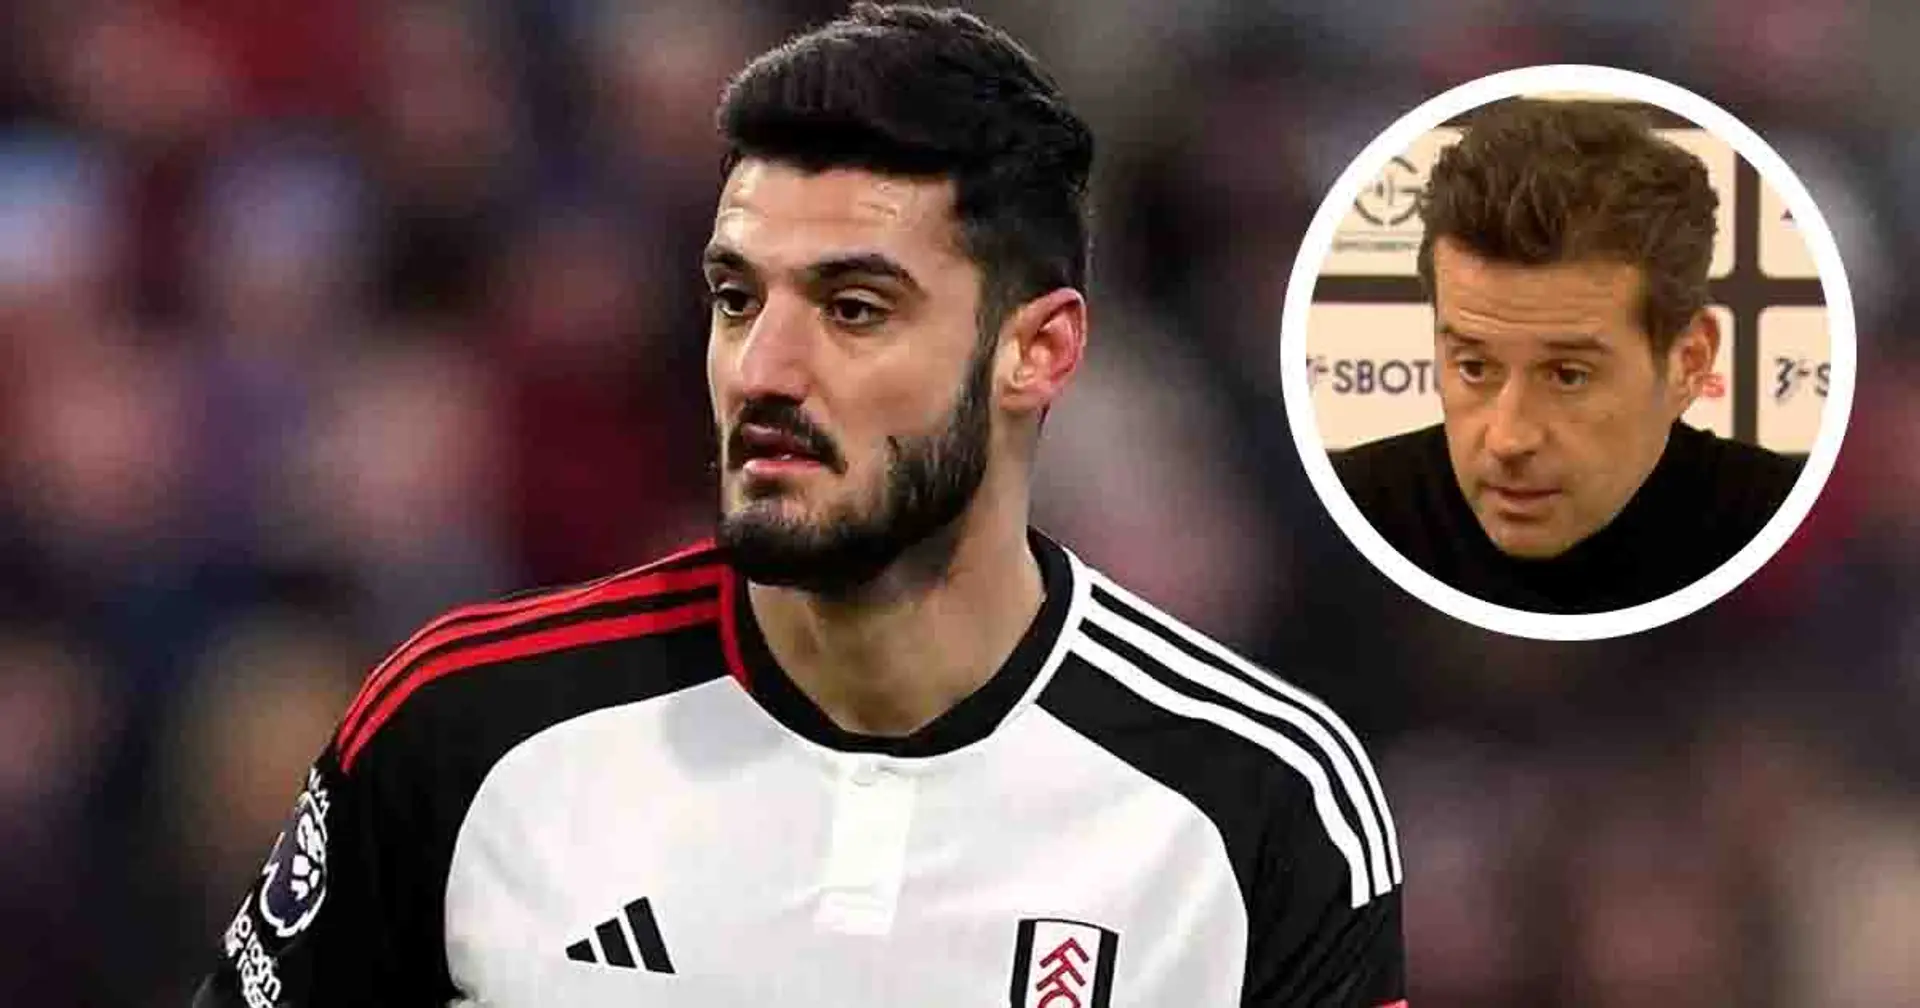 'I spoke with him': Marco Silva explains why Broja isn’t starting games for Fulham